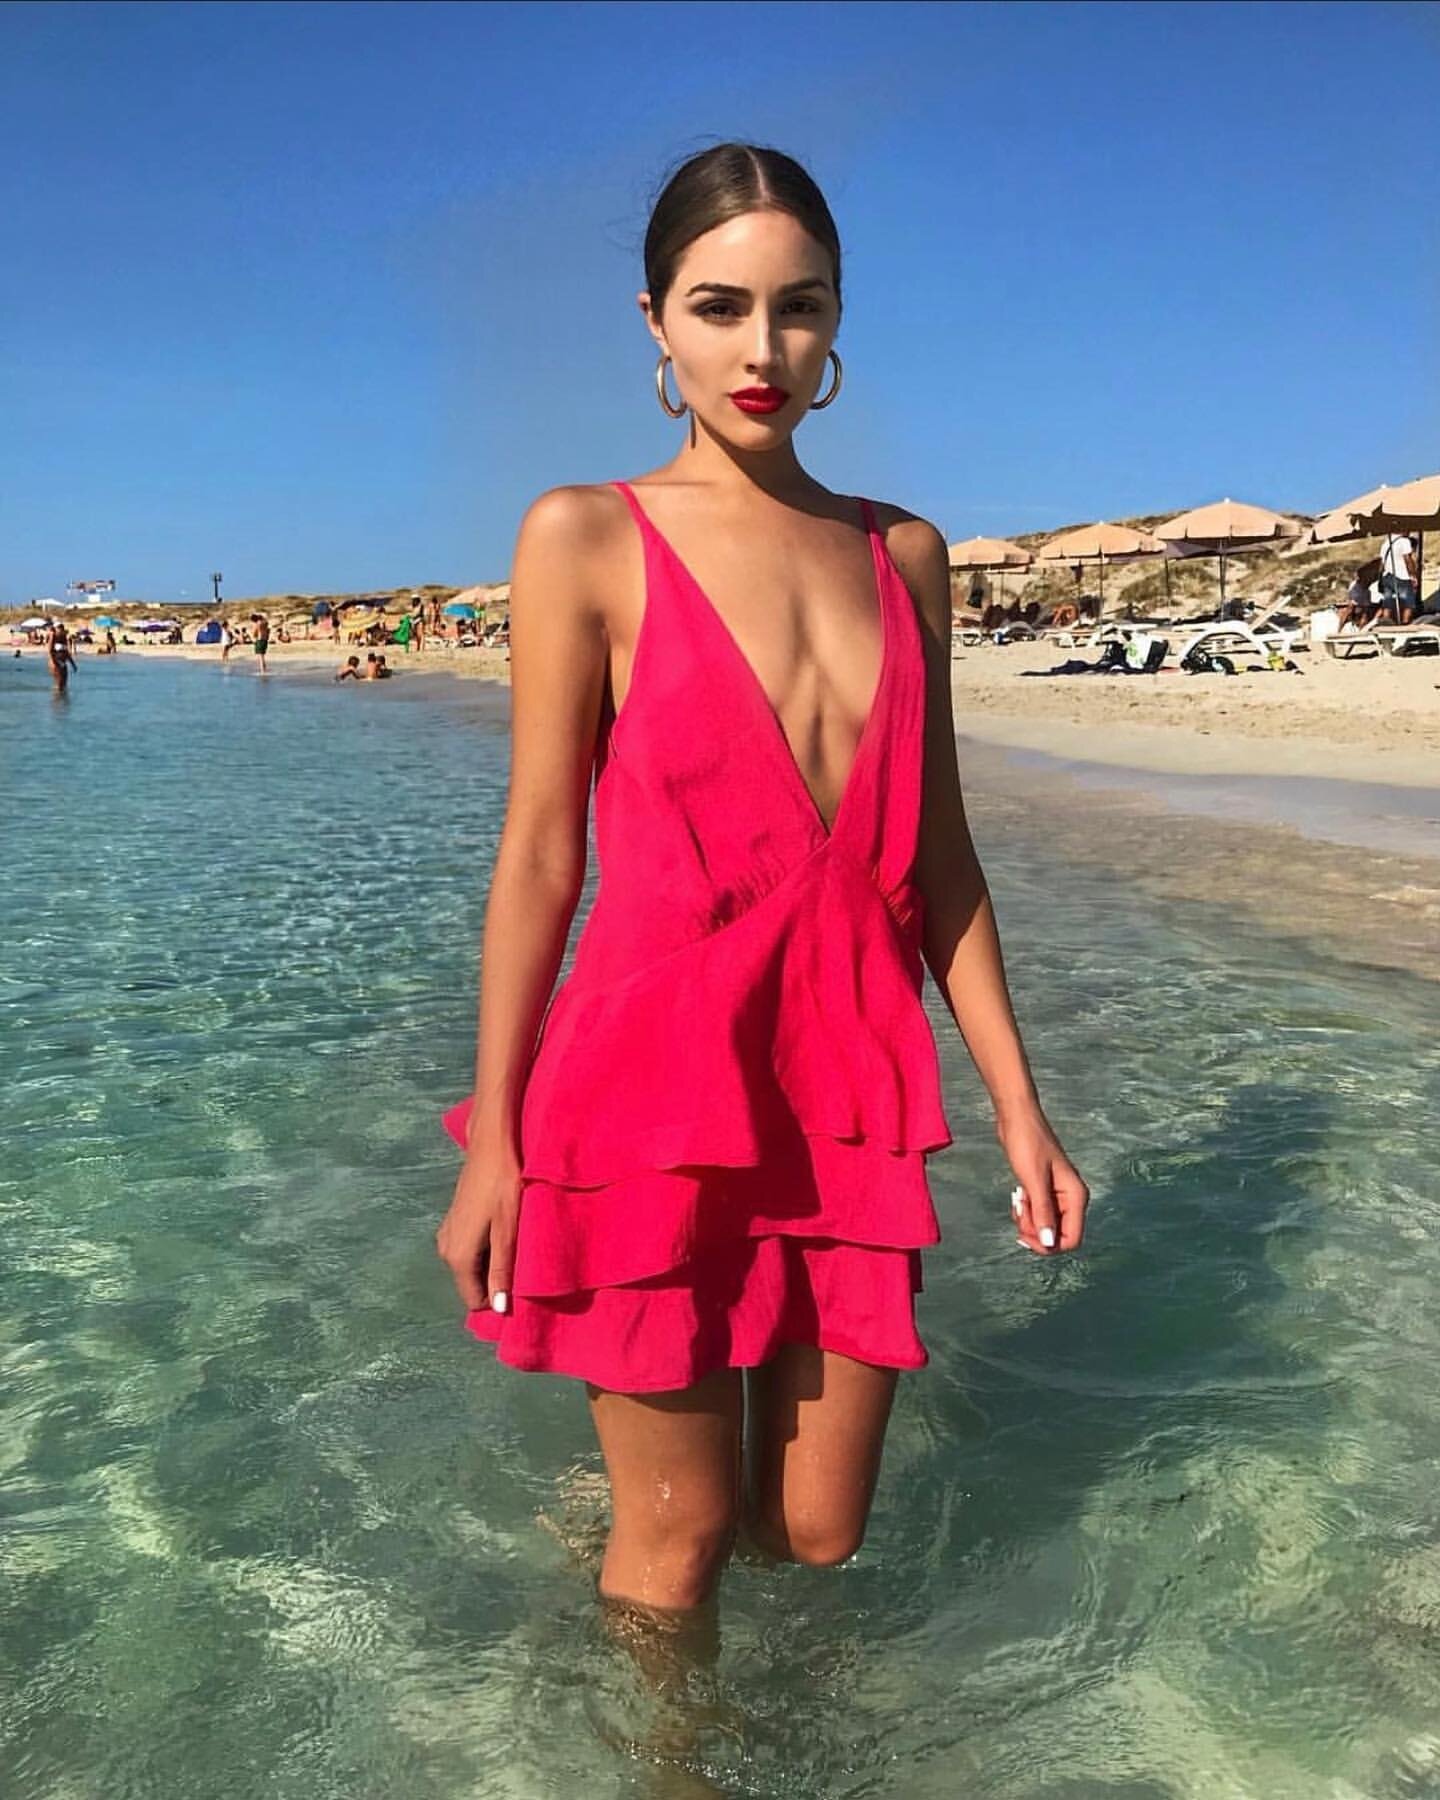 Olivia Culpo Wants YOU to Stay Home - Photo 8